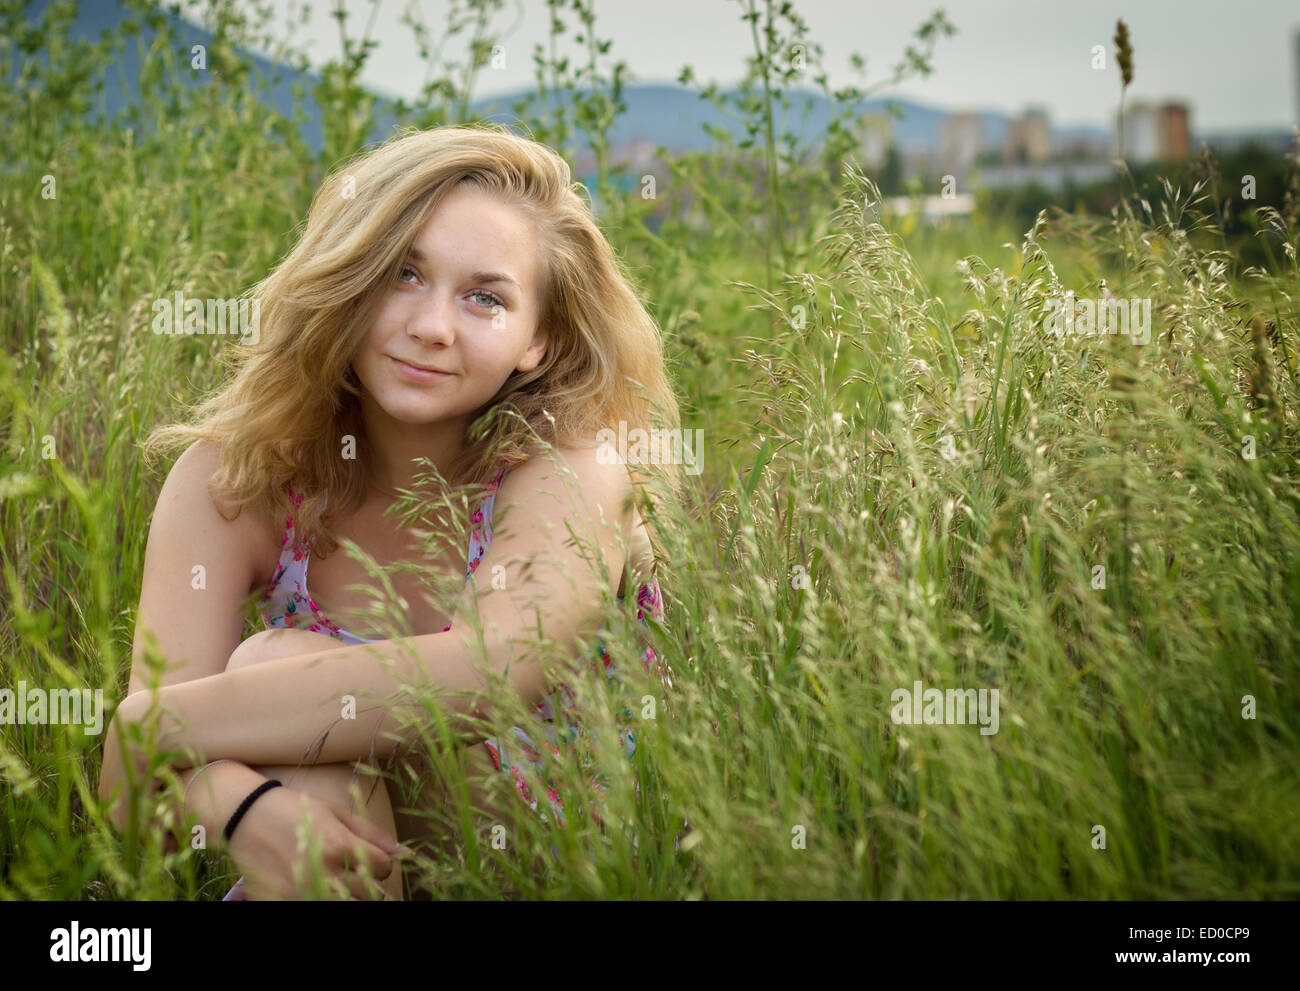 Portrait of teenage girl (14-15) sitting in field Banque D'Images